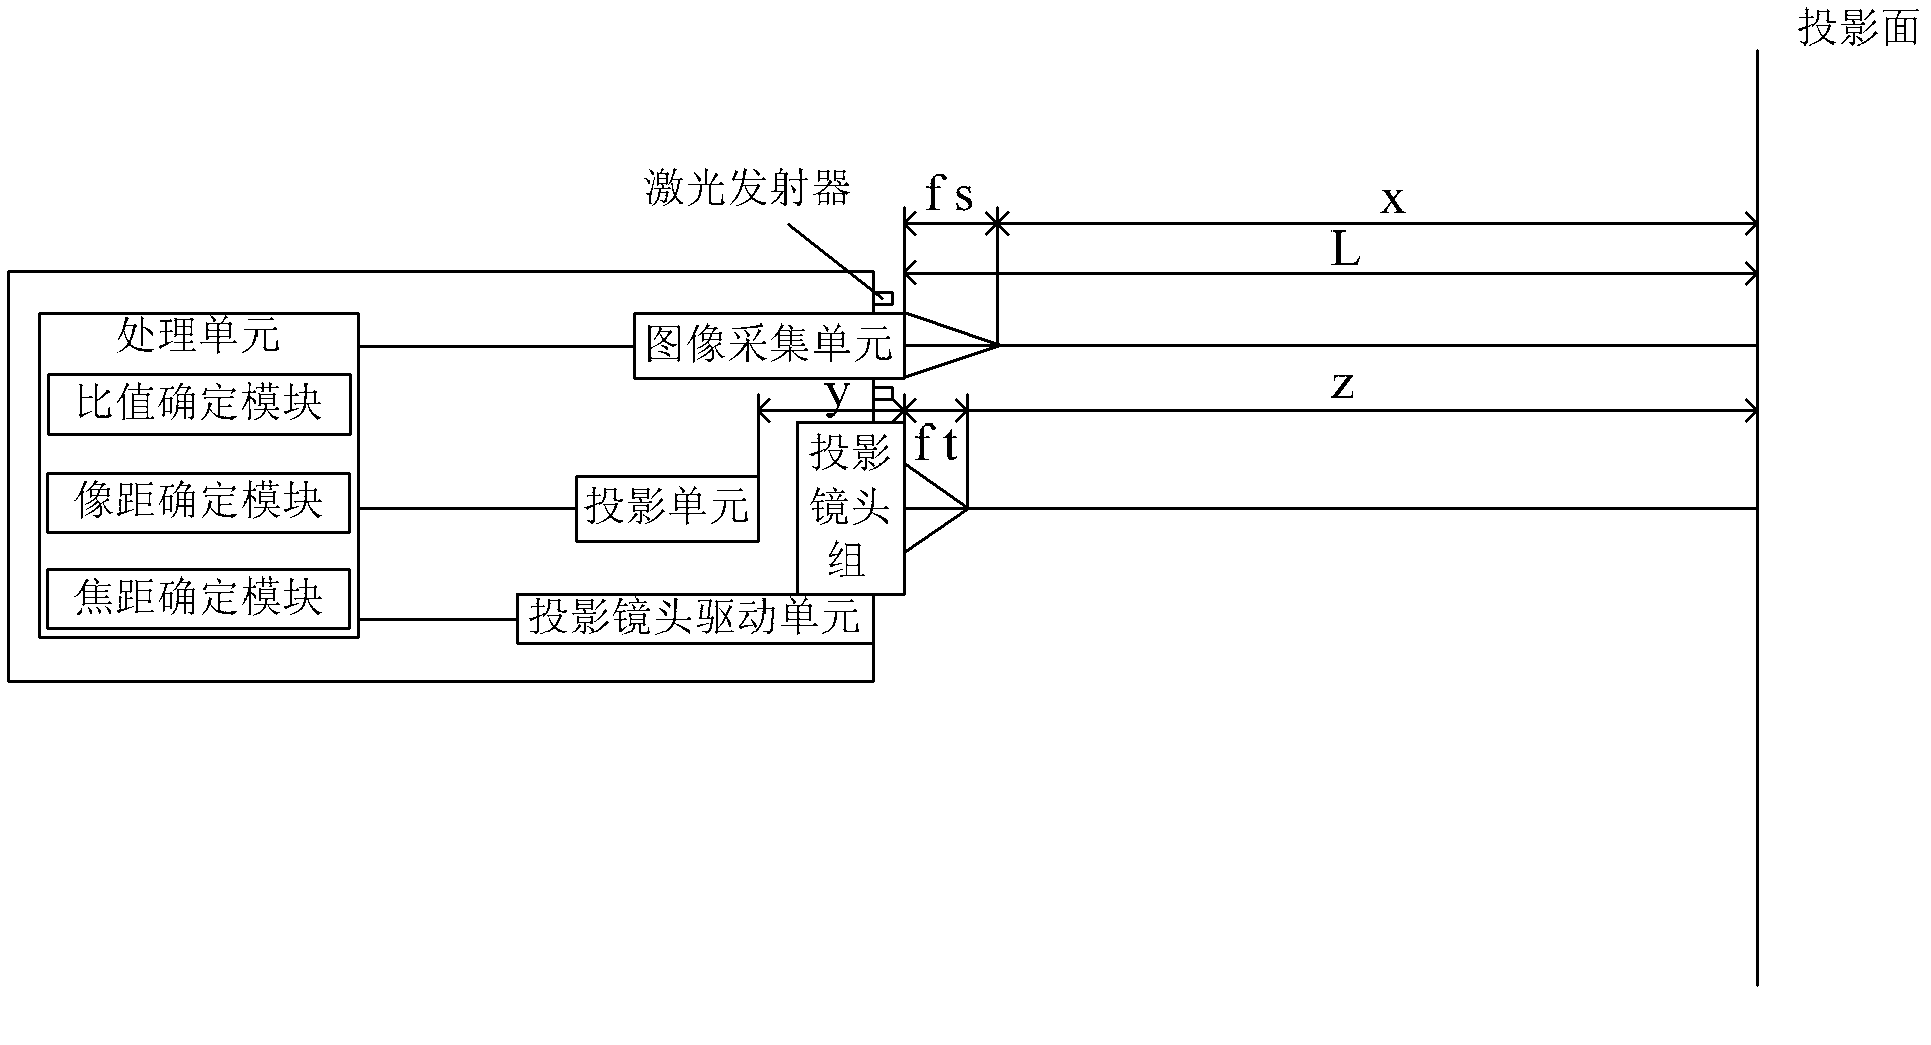 Projection device and automatic focusing method